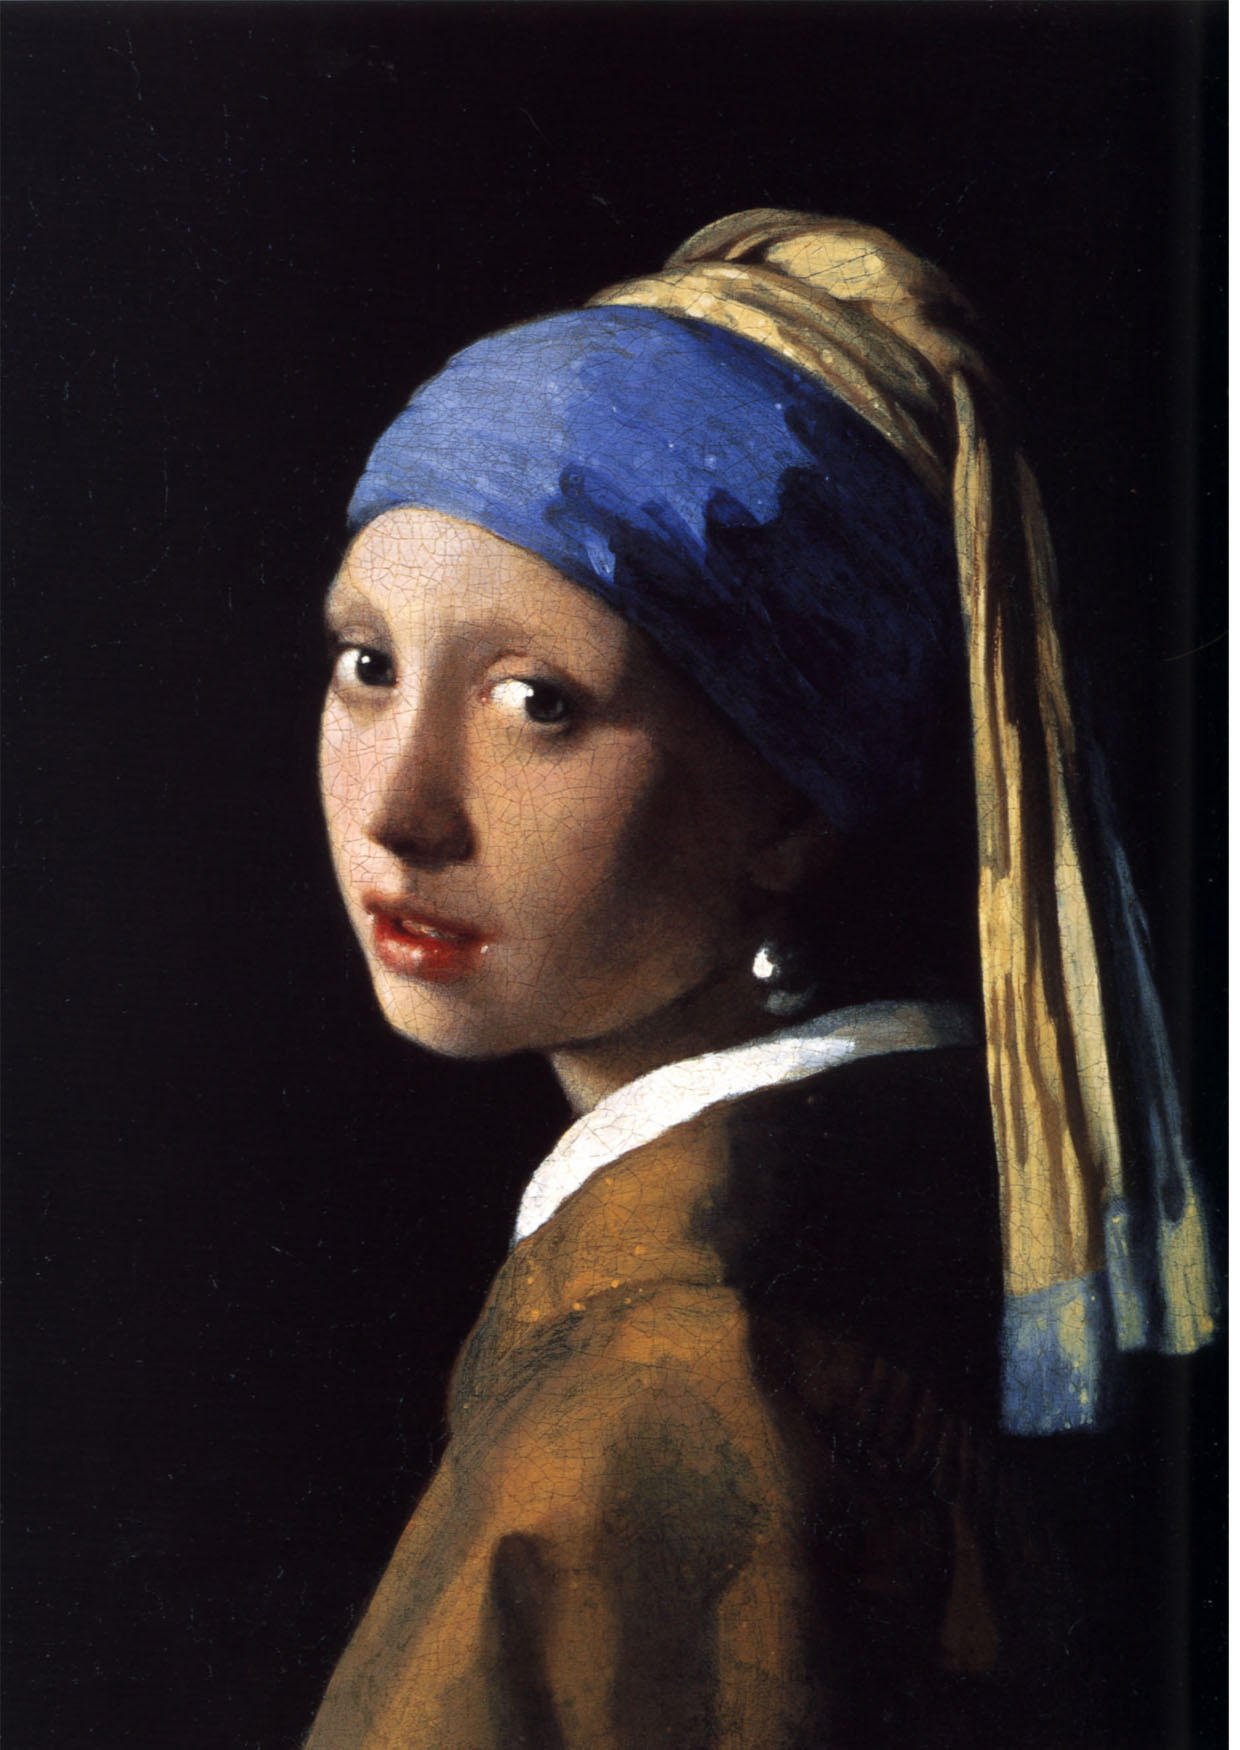 Image The Girl with a Pearl Earring - Johannes Vermeer